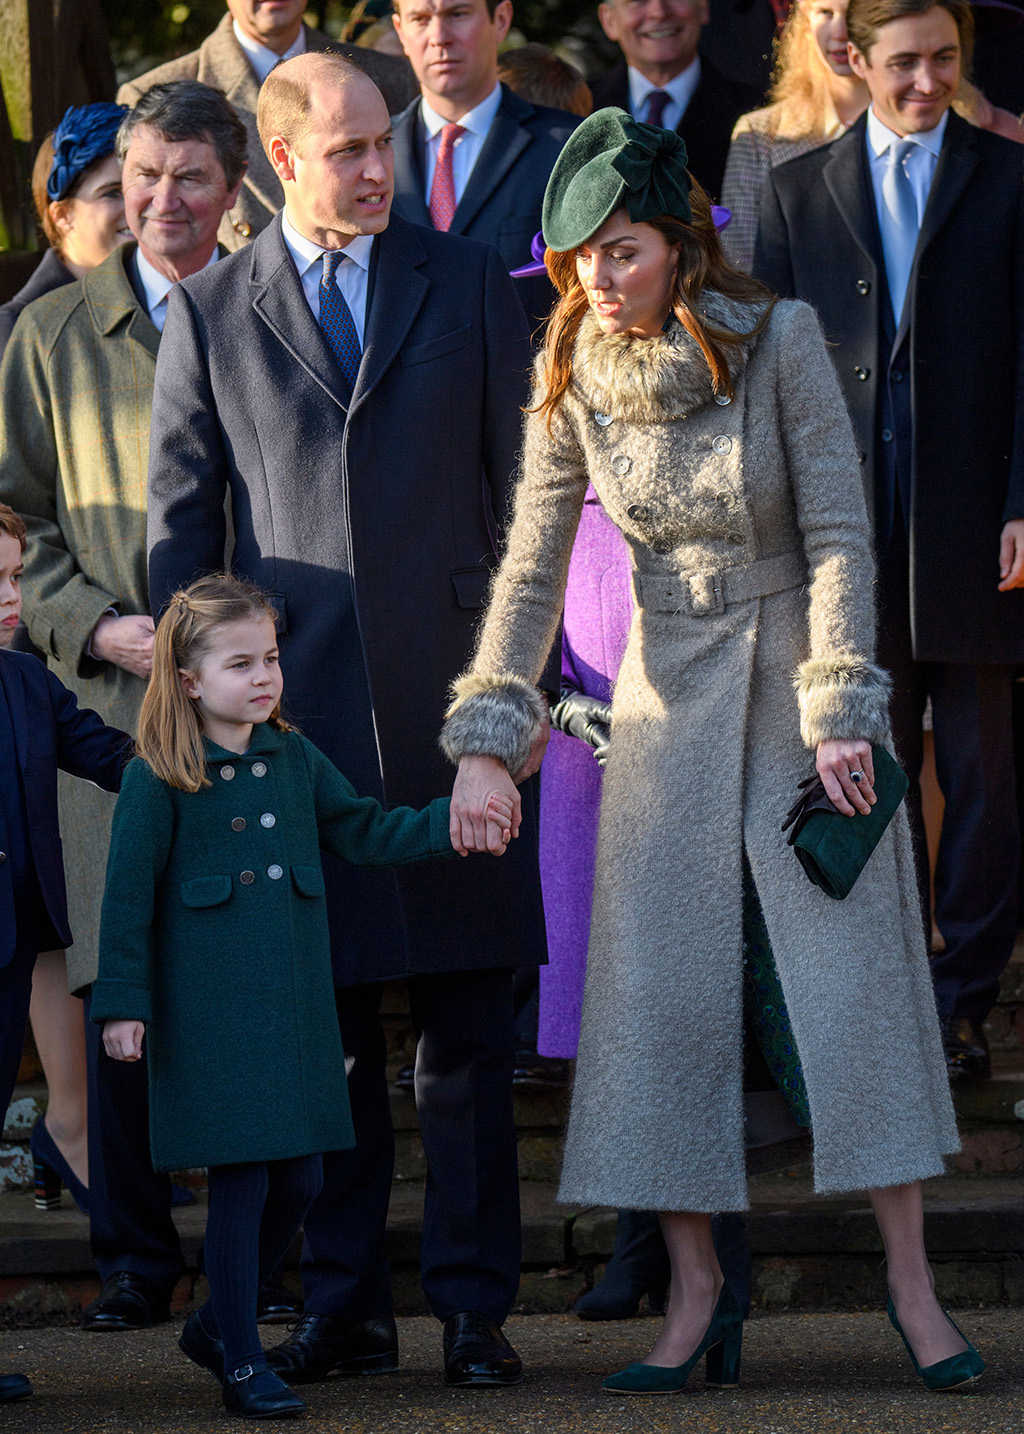 catherine-duchess-of-cambridge-in-gray-coat-christmas-day-church-service-2019